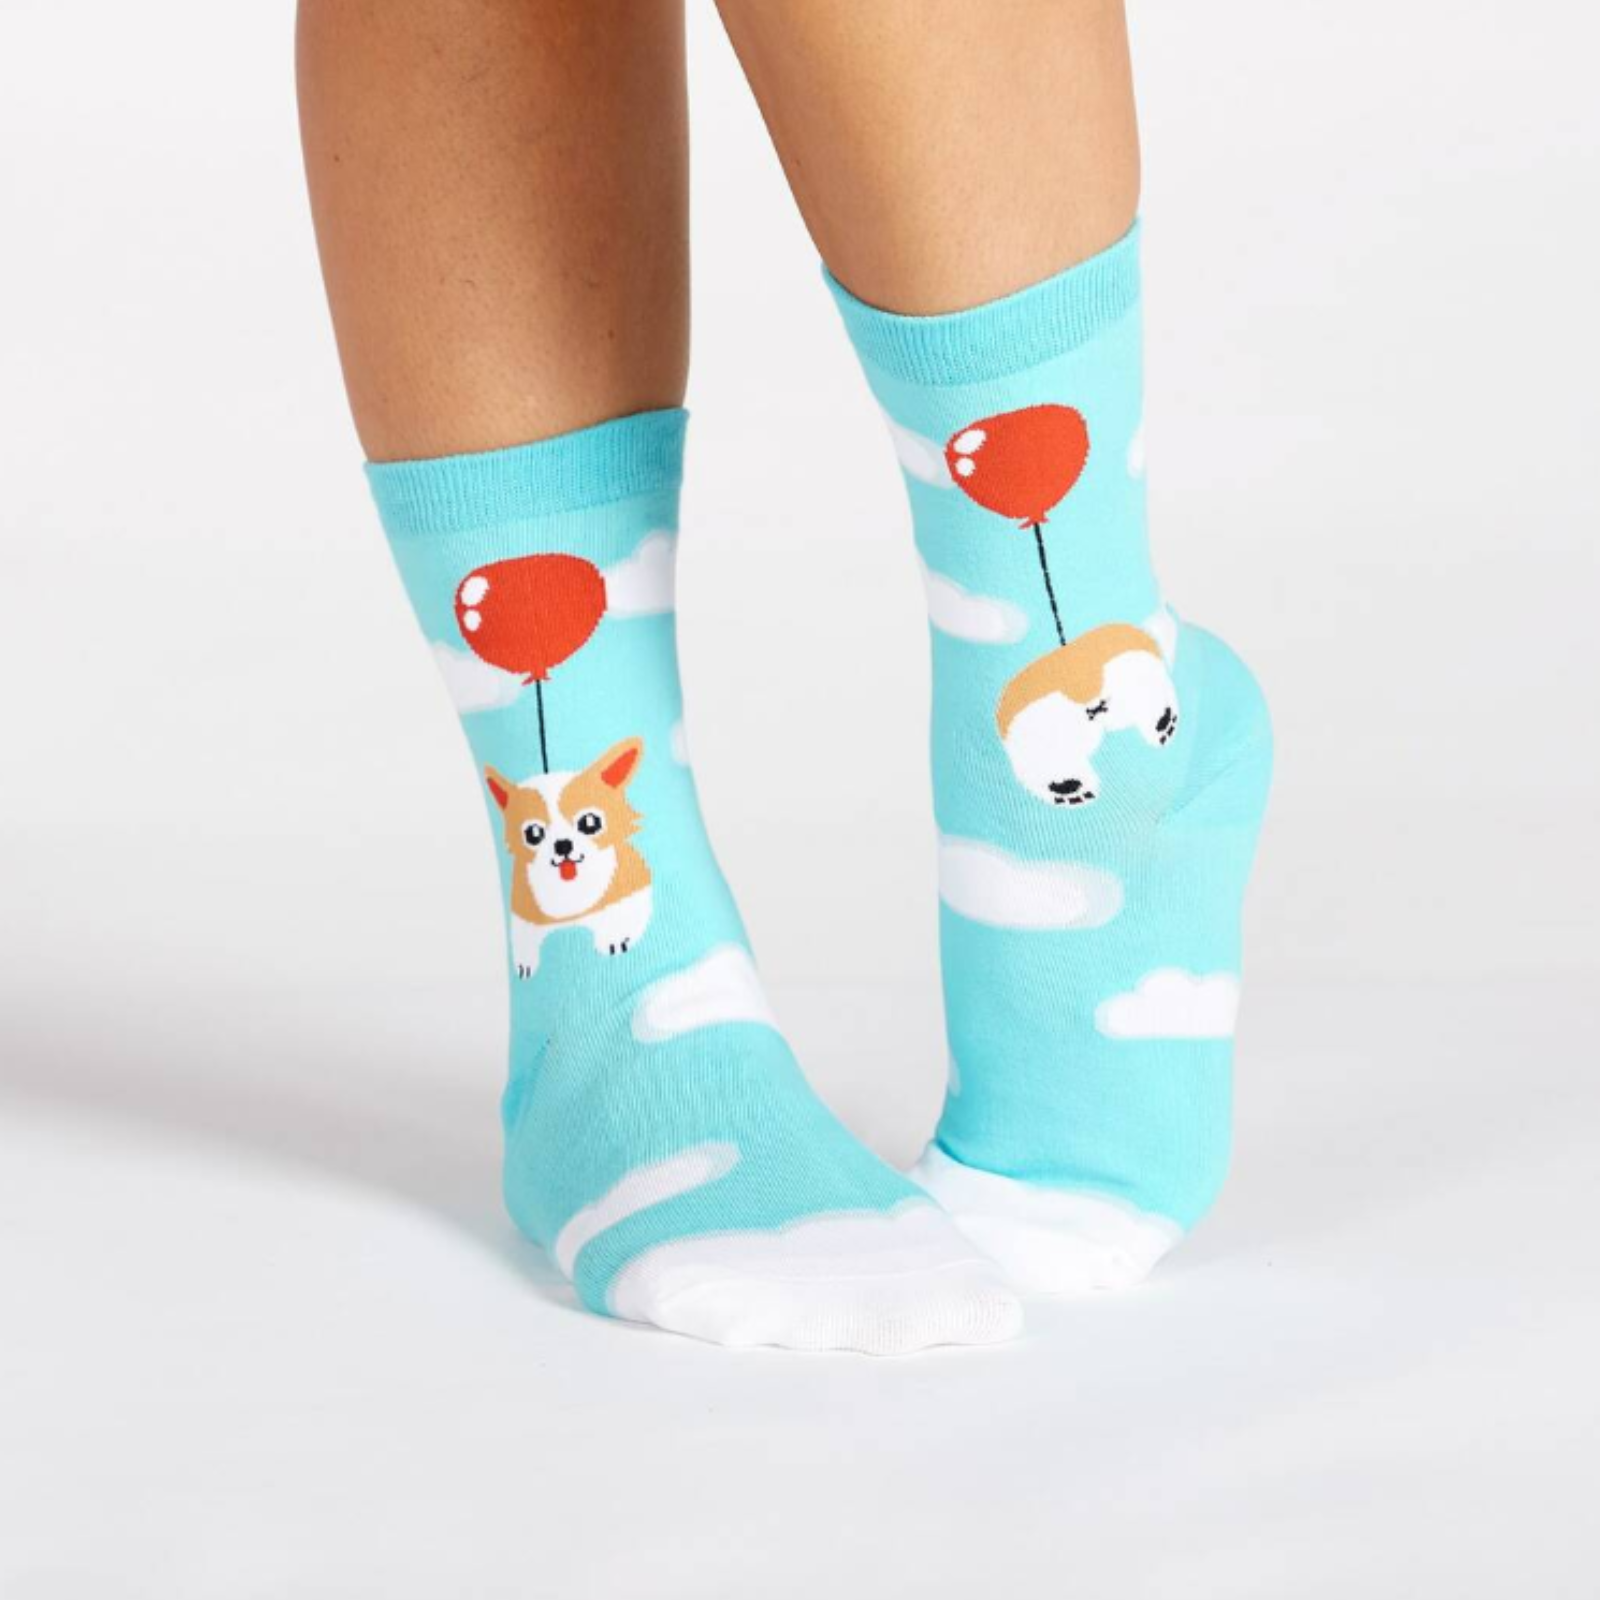 Sock It To Me Pup, Pup and Away women's crew socks featuring light blue socks with clouds all over and a Corgi dog floating by a red balloon, socks show front and back of Corgi dog. Socks worn by model seen from side.